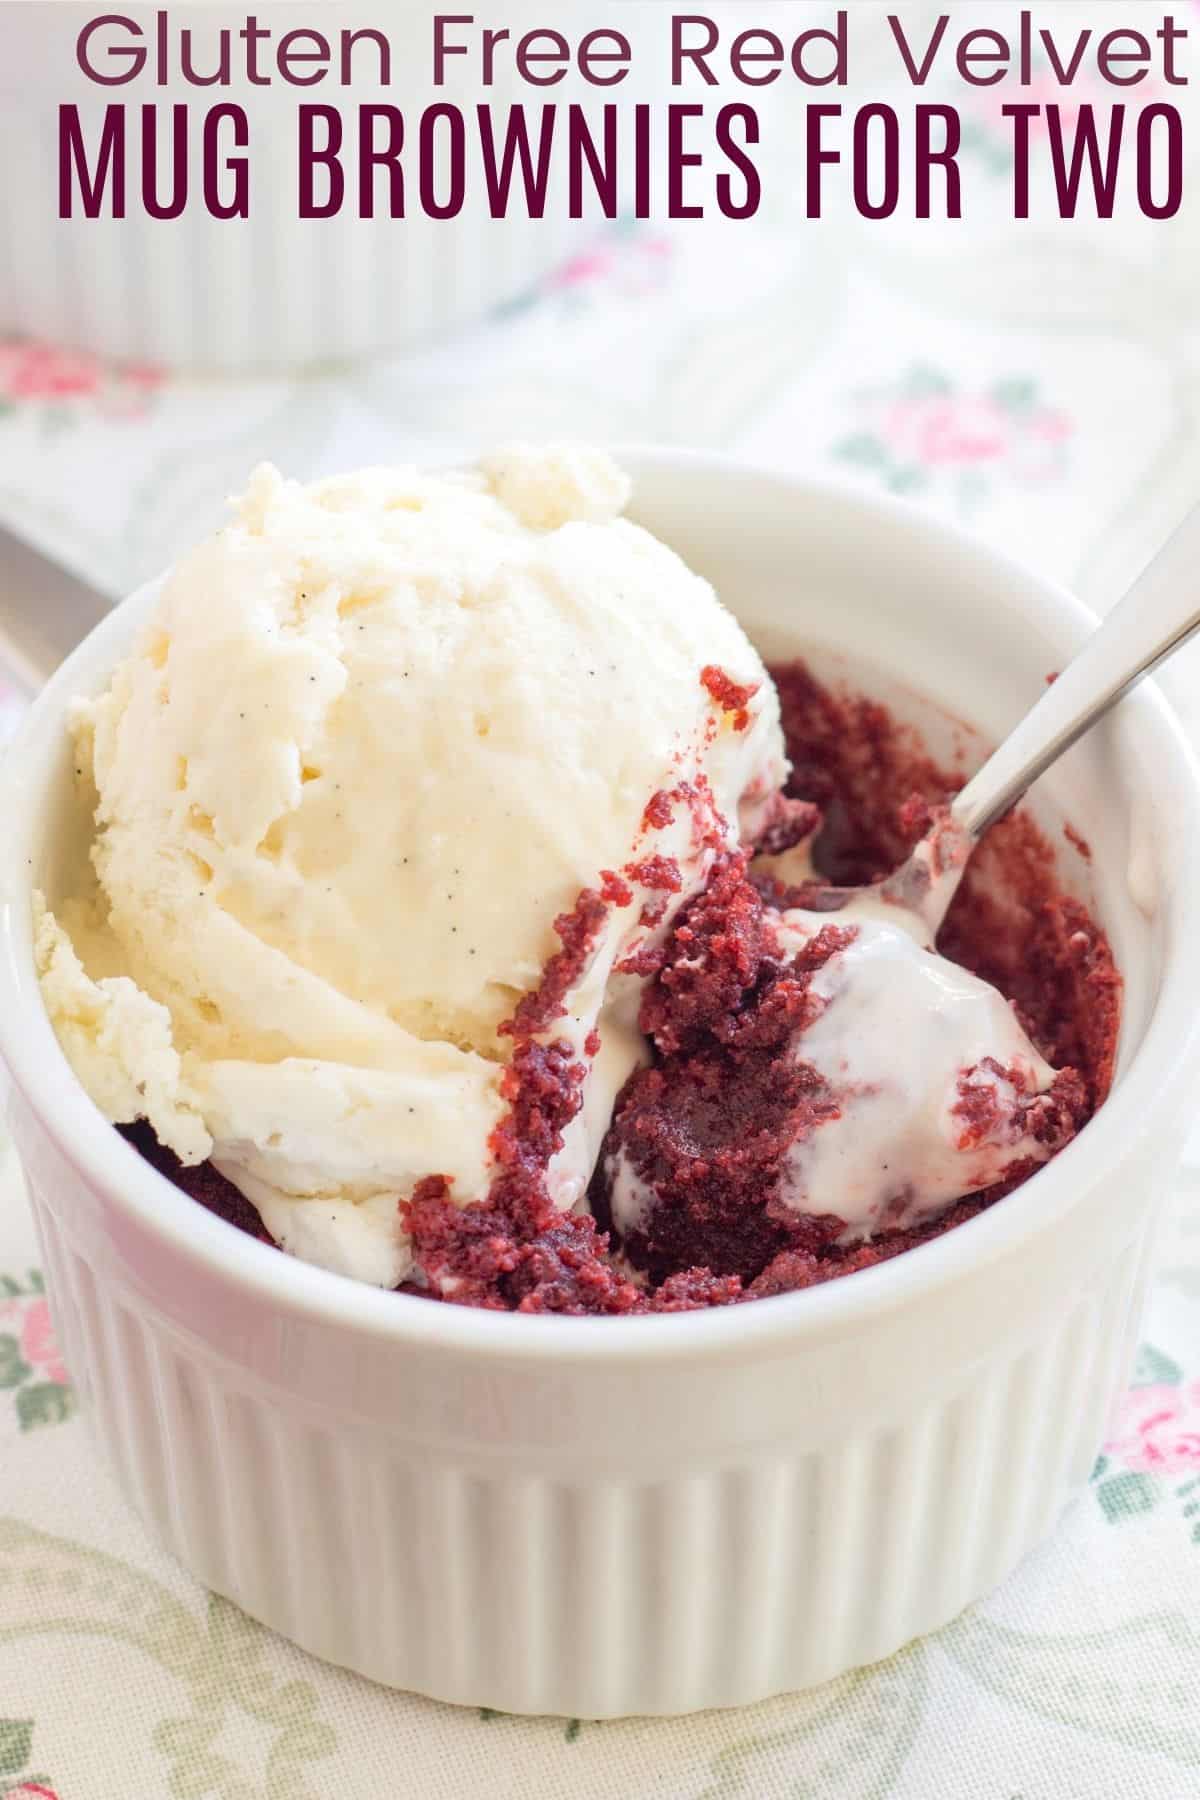 Spoon picking up a bite of red velvet brownie from a ramekin